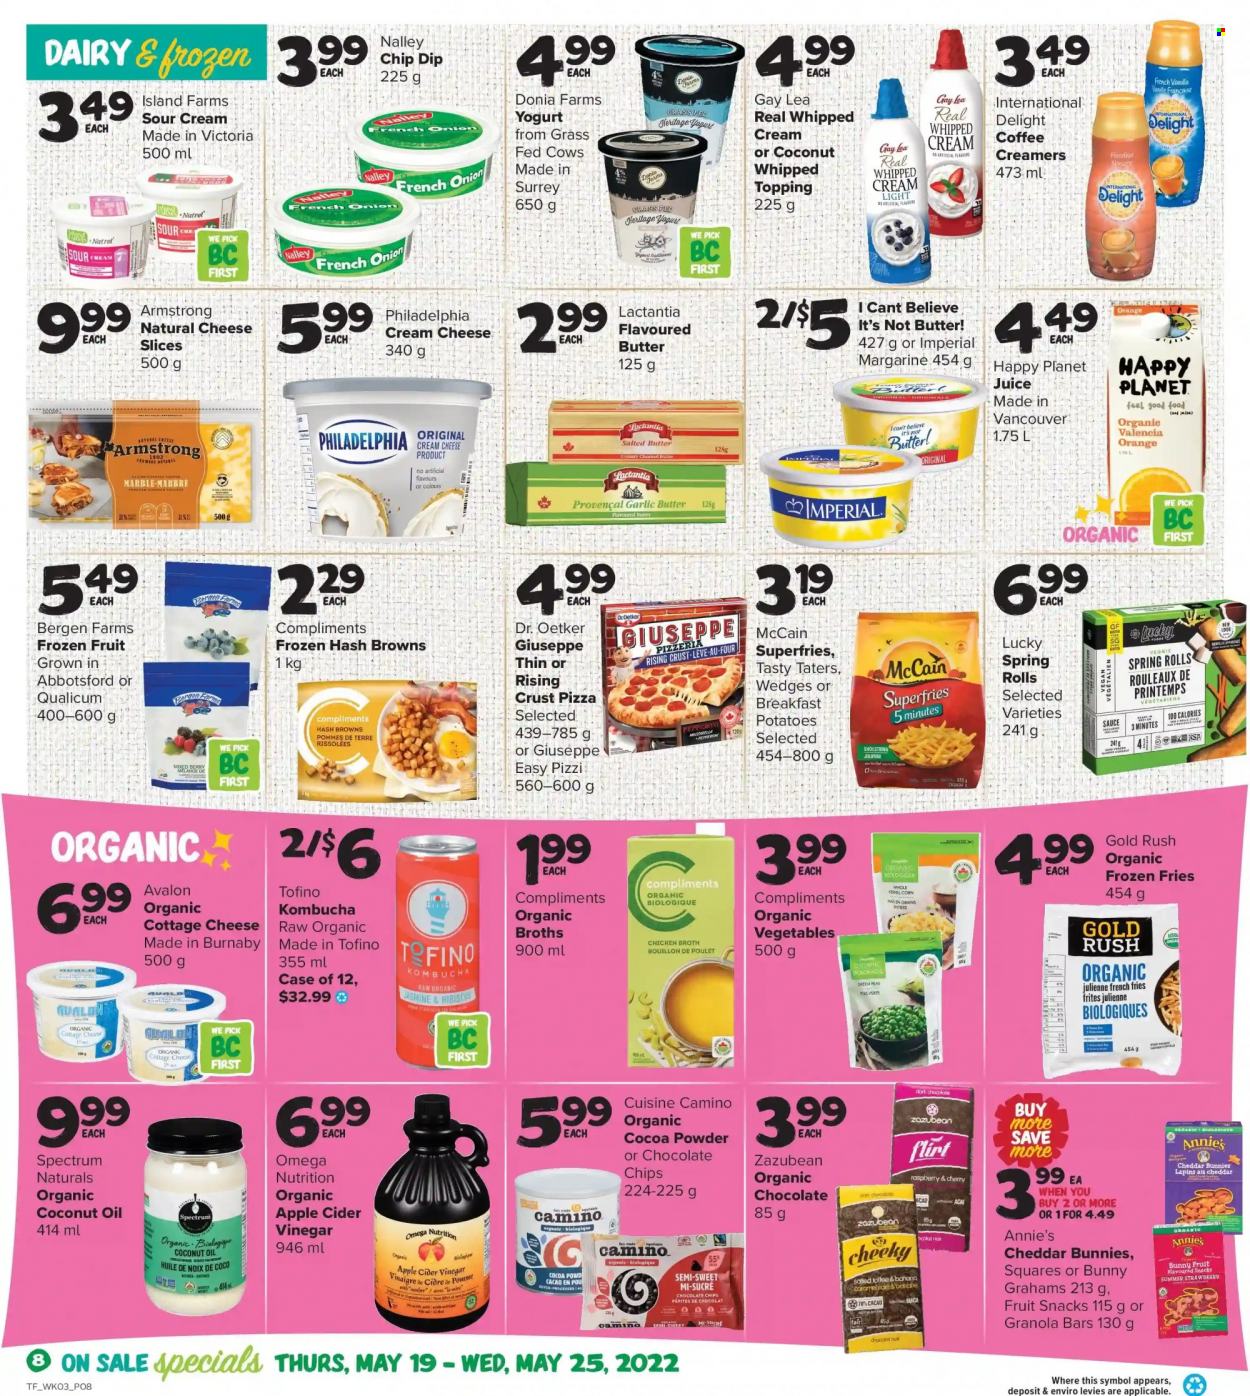 thumbnail - Thrifty Foods Flyer - May 19, 2022 - May 25, 2022 - Sales products - onion, snack, pizza, spring rolls, Annie's, crushed garlic, cottage cheese, cream cheese, sliced cheese, cheese, Dr. Oetker, yoghurt, margarine, I Can't Believe It's Not Butter, sour cream, whipped cream, creamer, dip, frozen fruit, McCain, hash browns, potato fries, french fries, graham crackers, chocolate chips, fruit snack, bars, cocoa, chicken broth, topping, broth, granola bar, apple cider vinegar, coconut oil, juice, kombucha, coffee, Spectrum, Philadelphia. Page 8.